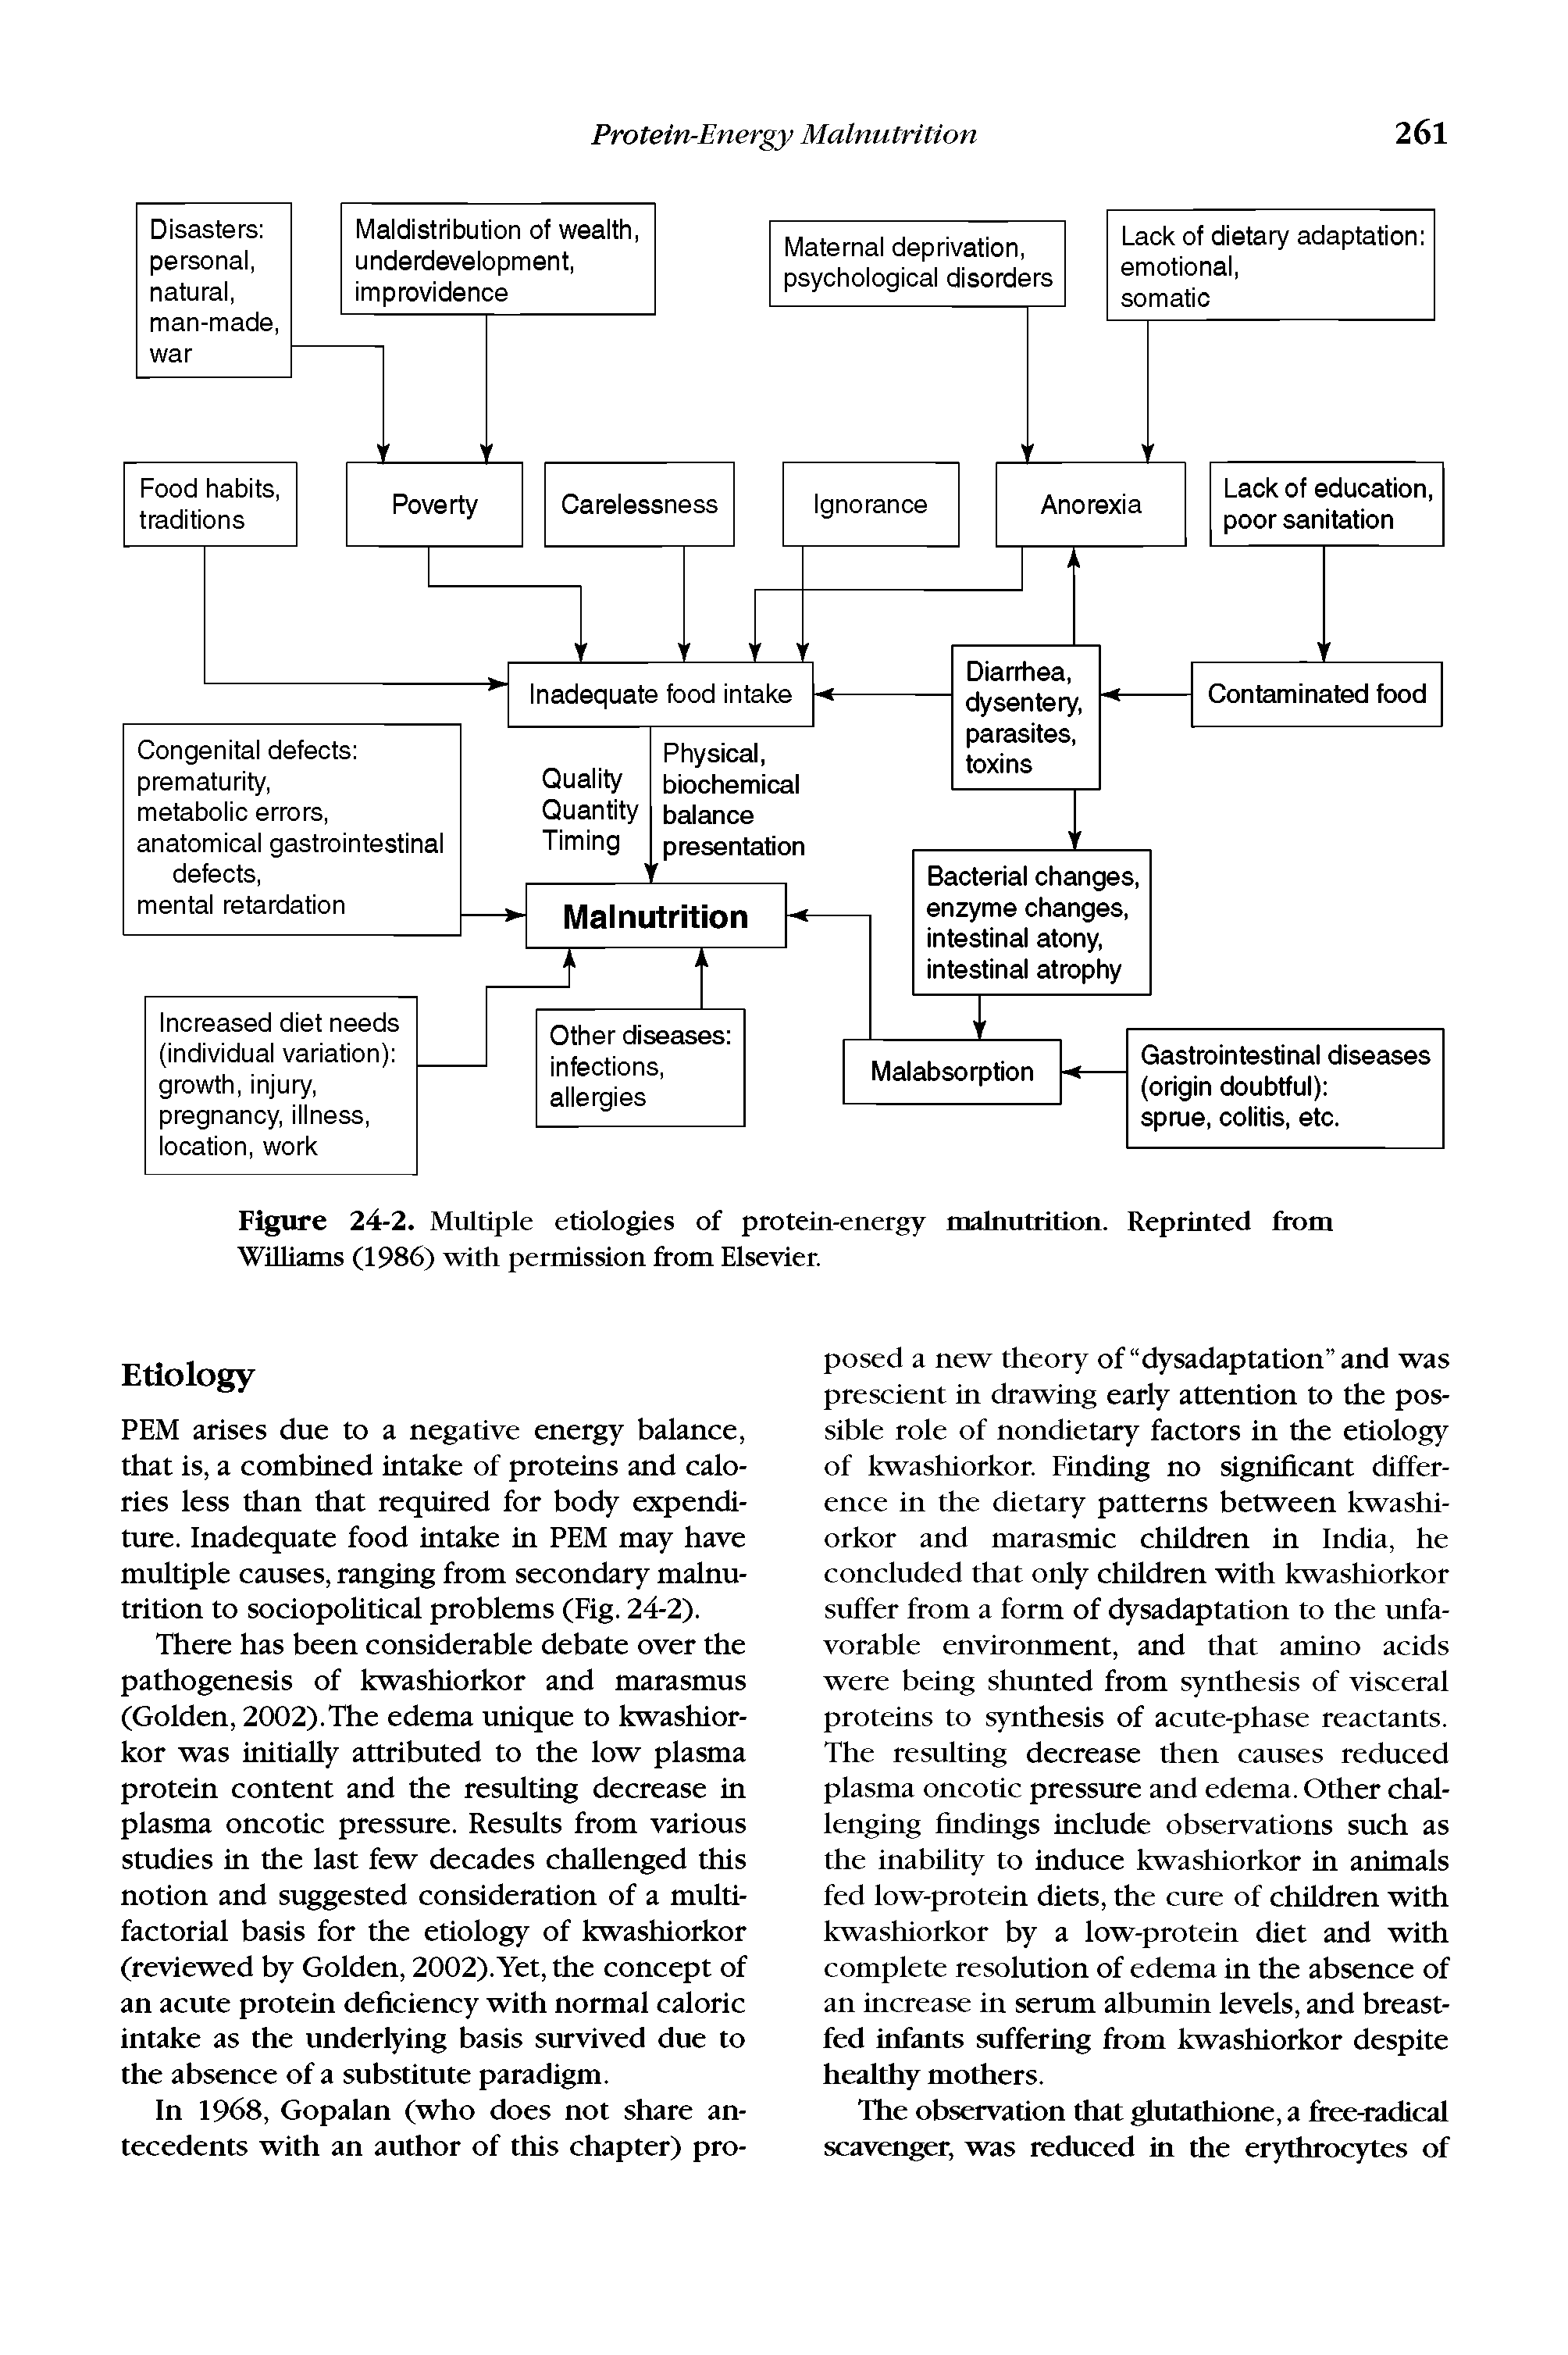 Figure 24-2. Multiple etiologies of protein-energy malnutrition. Reprinted from Williams (1986) with permission from Elsevier.